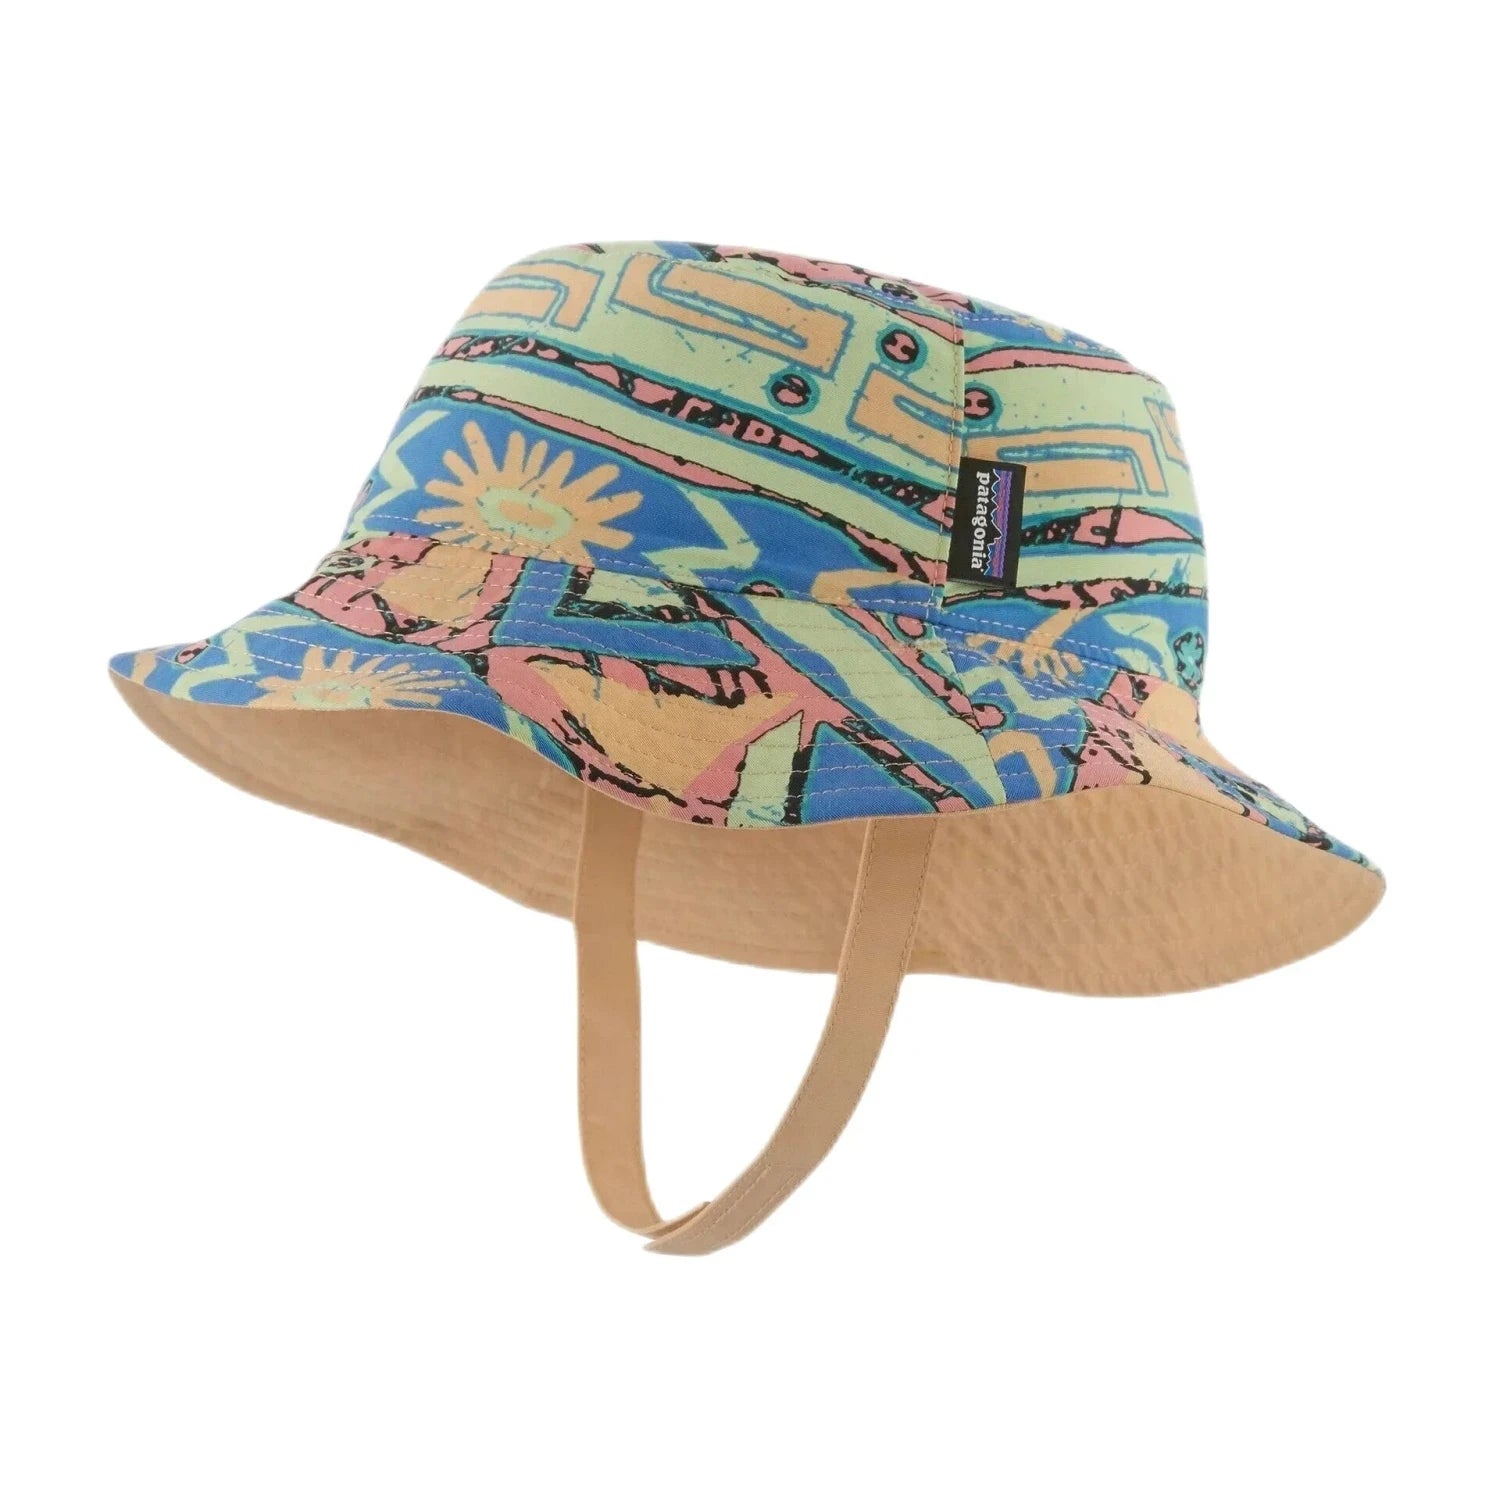 Patagonia Baby Sun Bucket Hat, High Hopes Salamander, front and side view